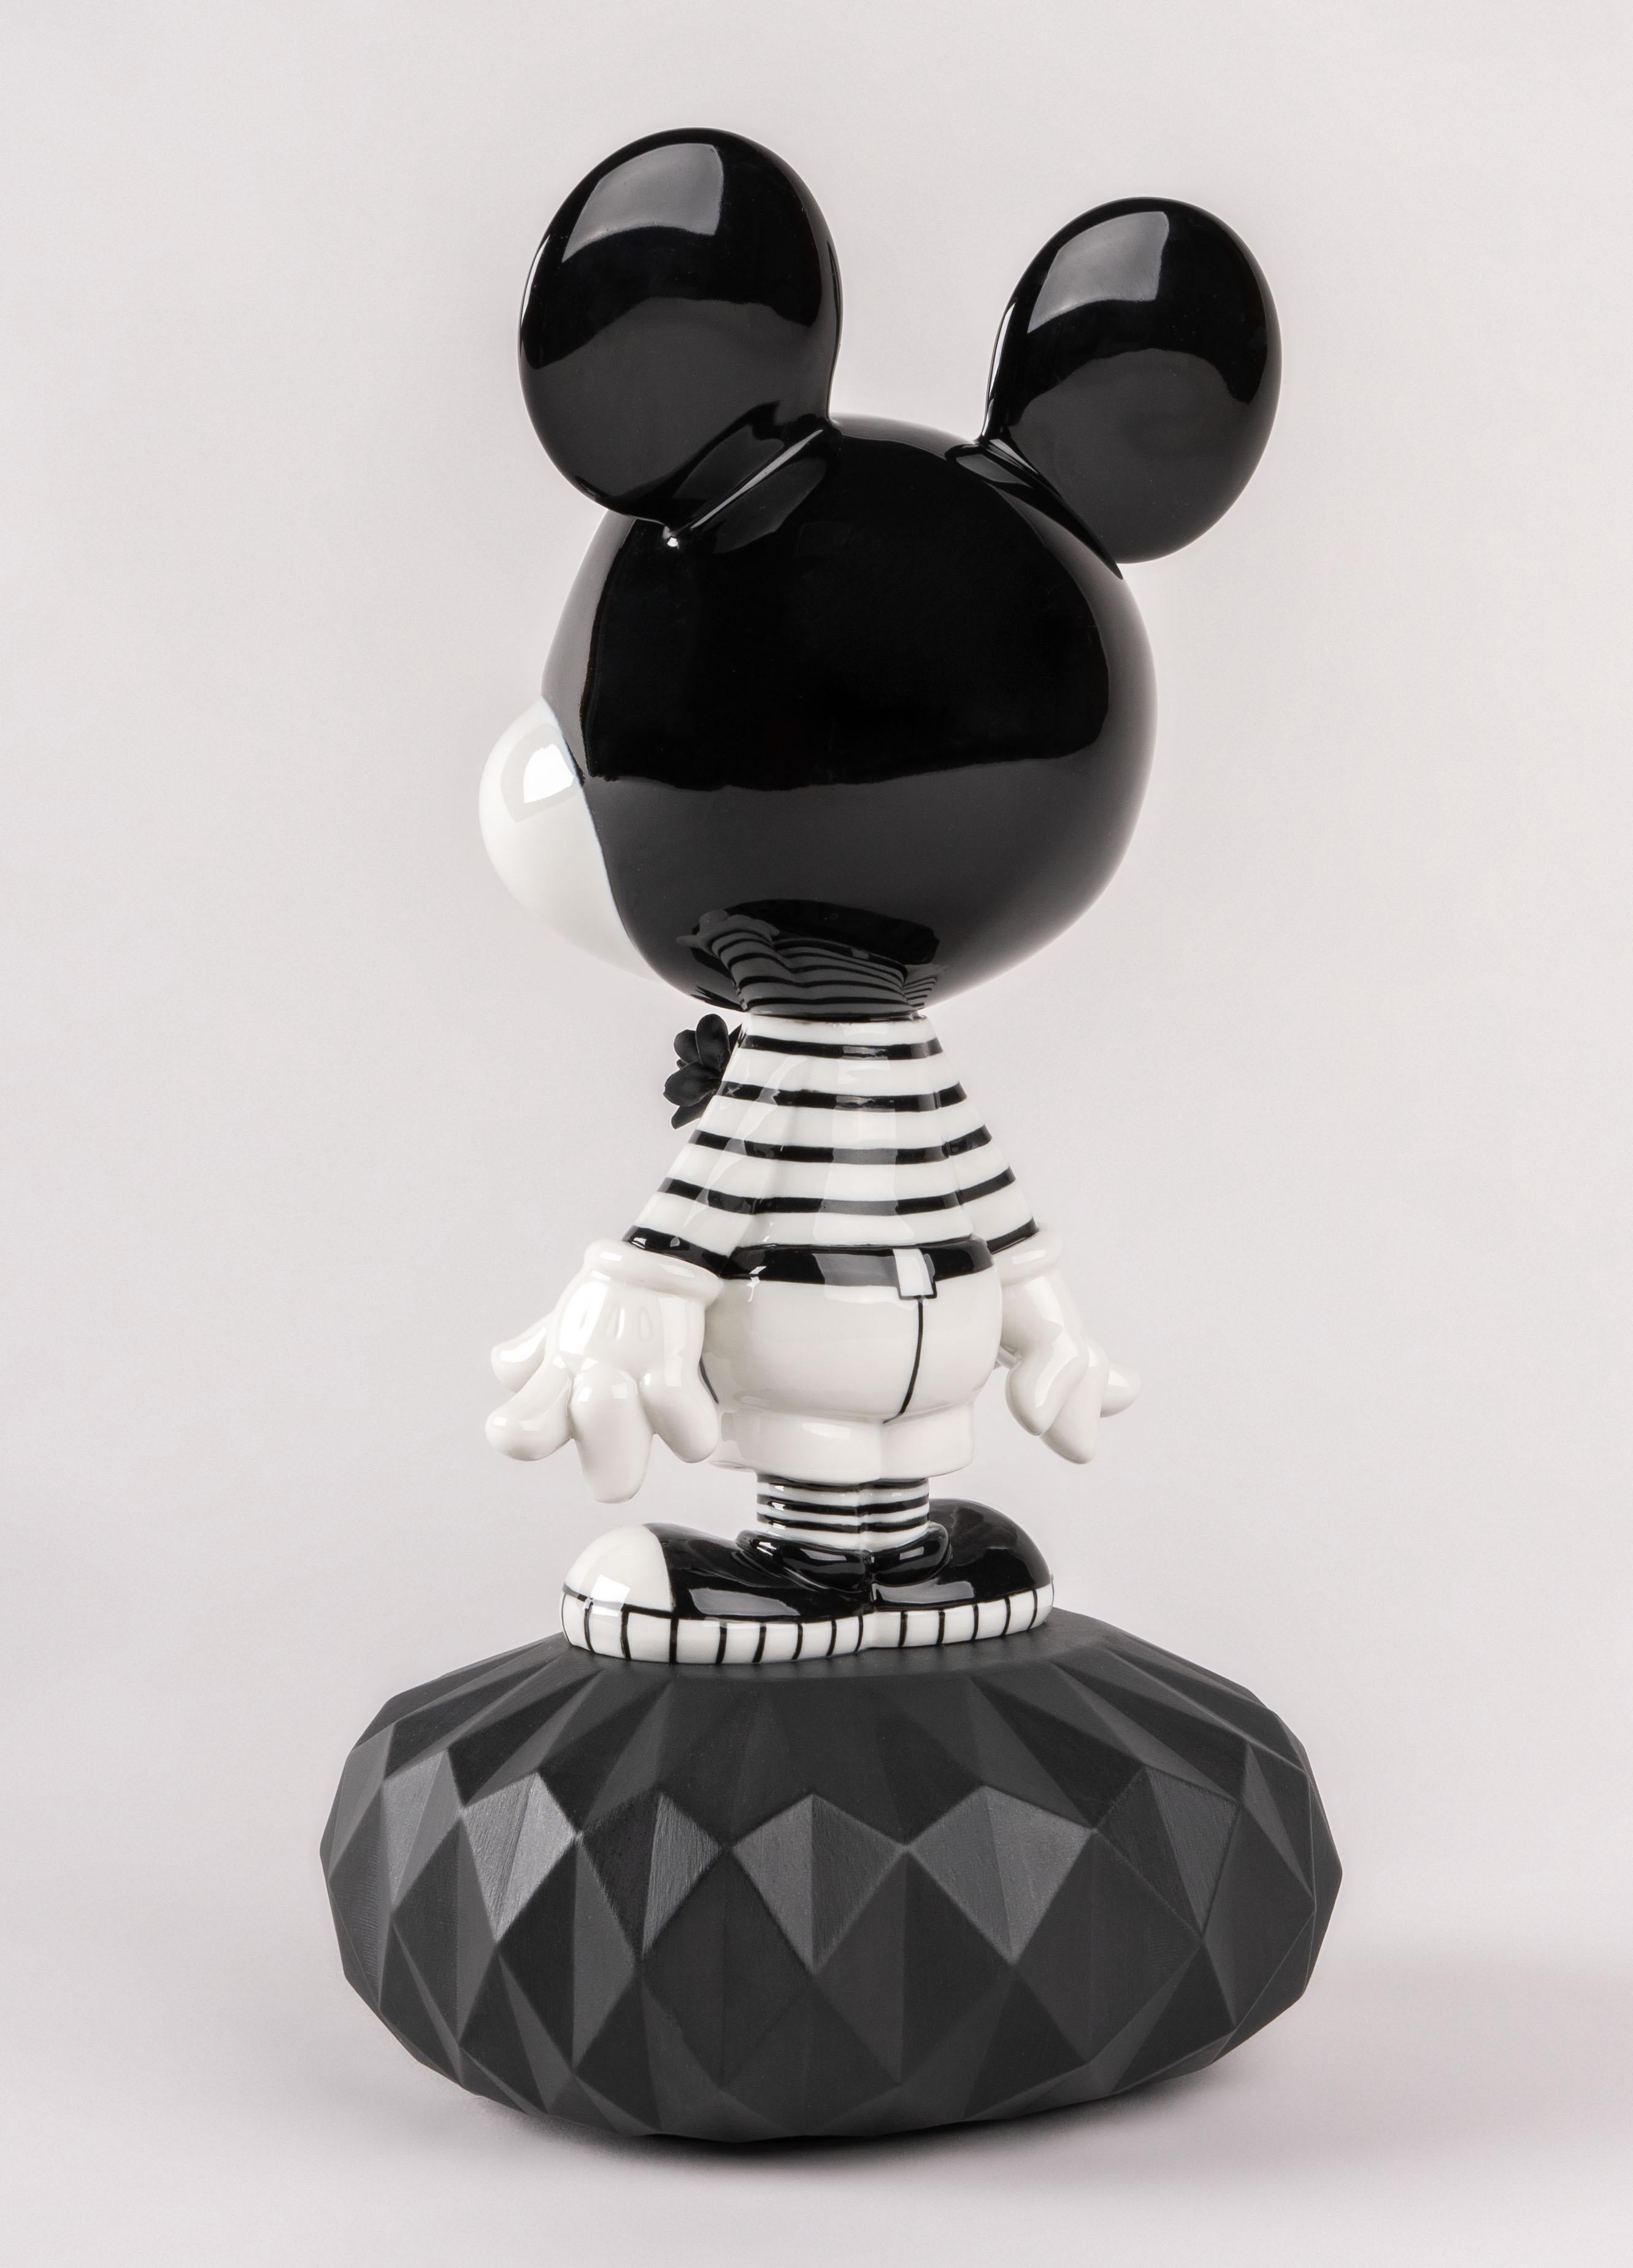 Spanish Mickey in black and white